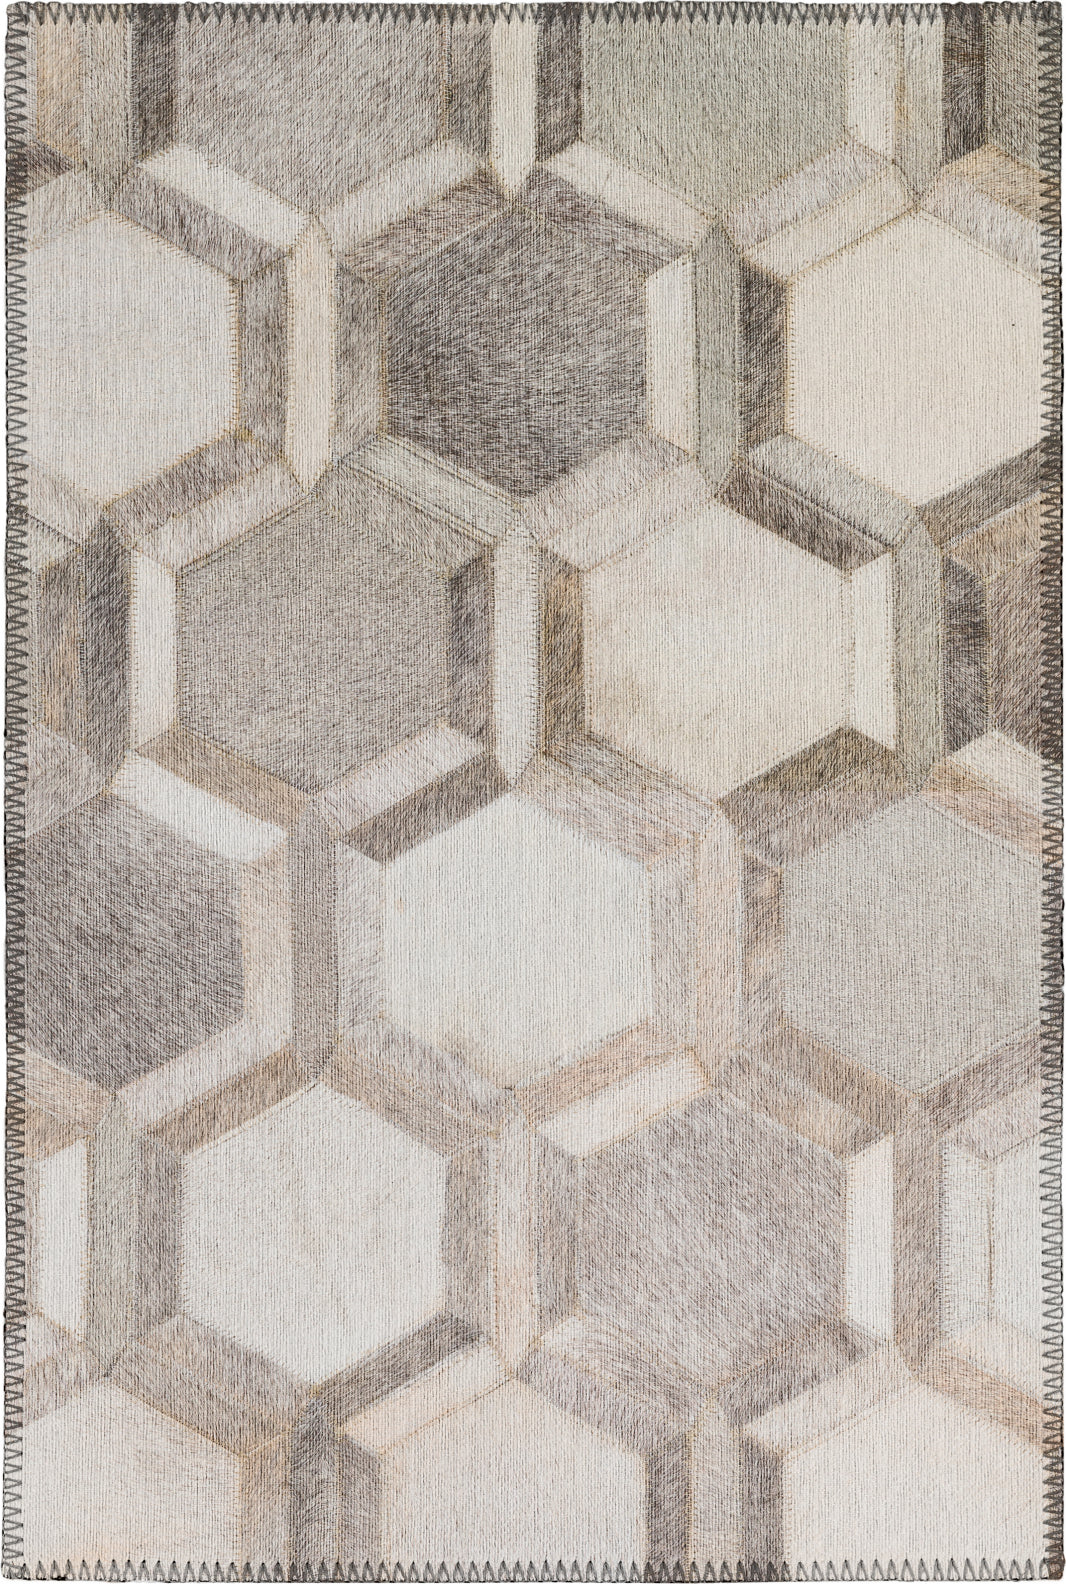 Dalyn Stetson SS1 Flannel Area Rug main image